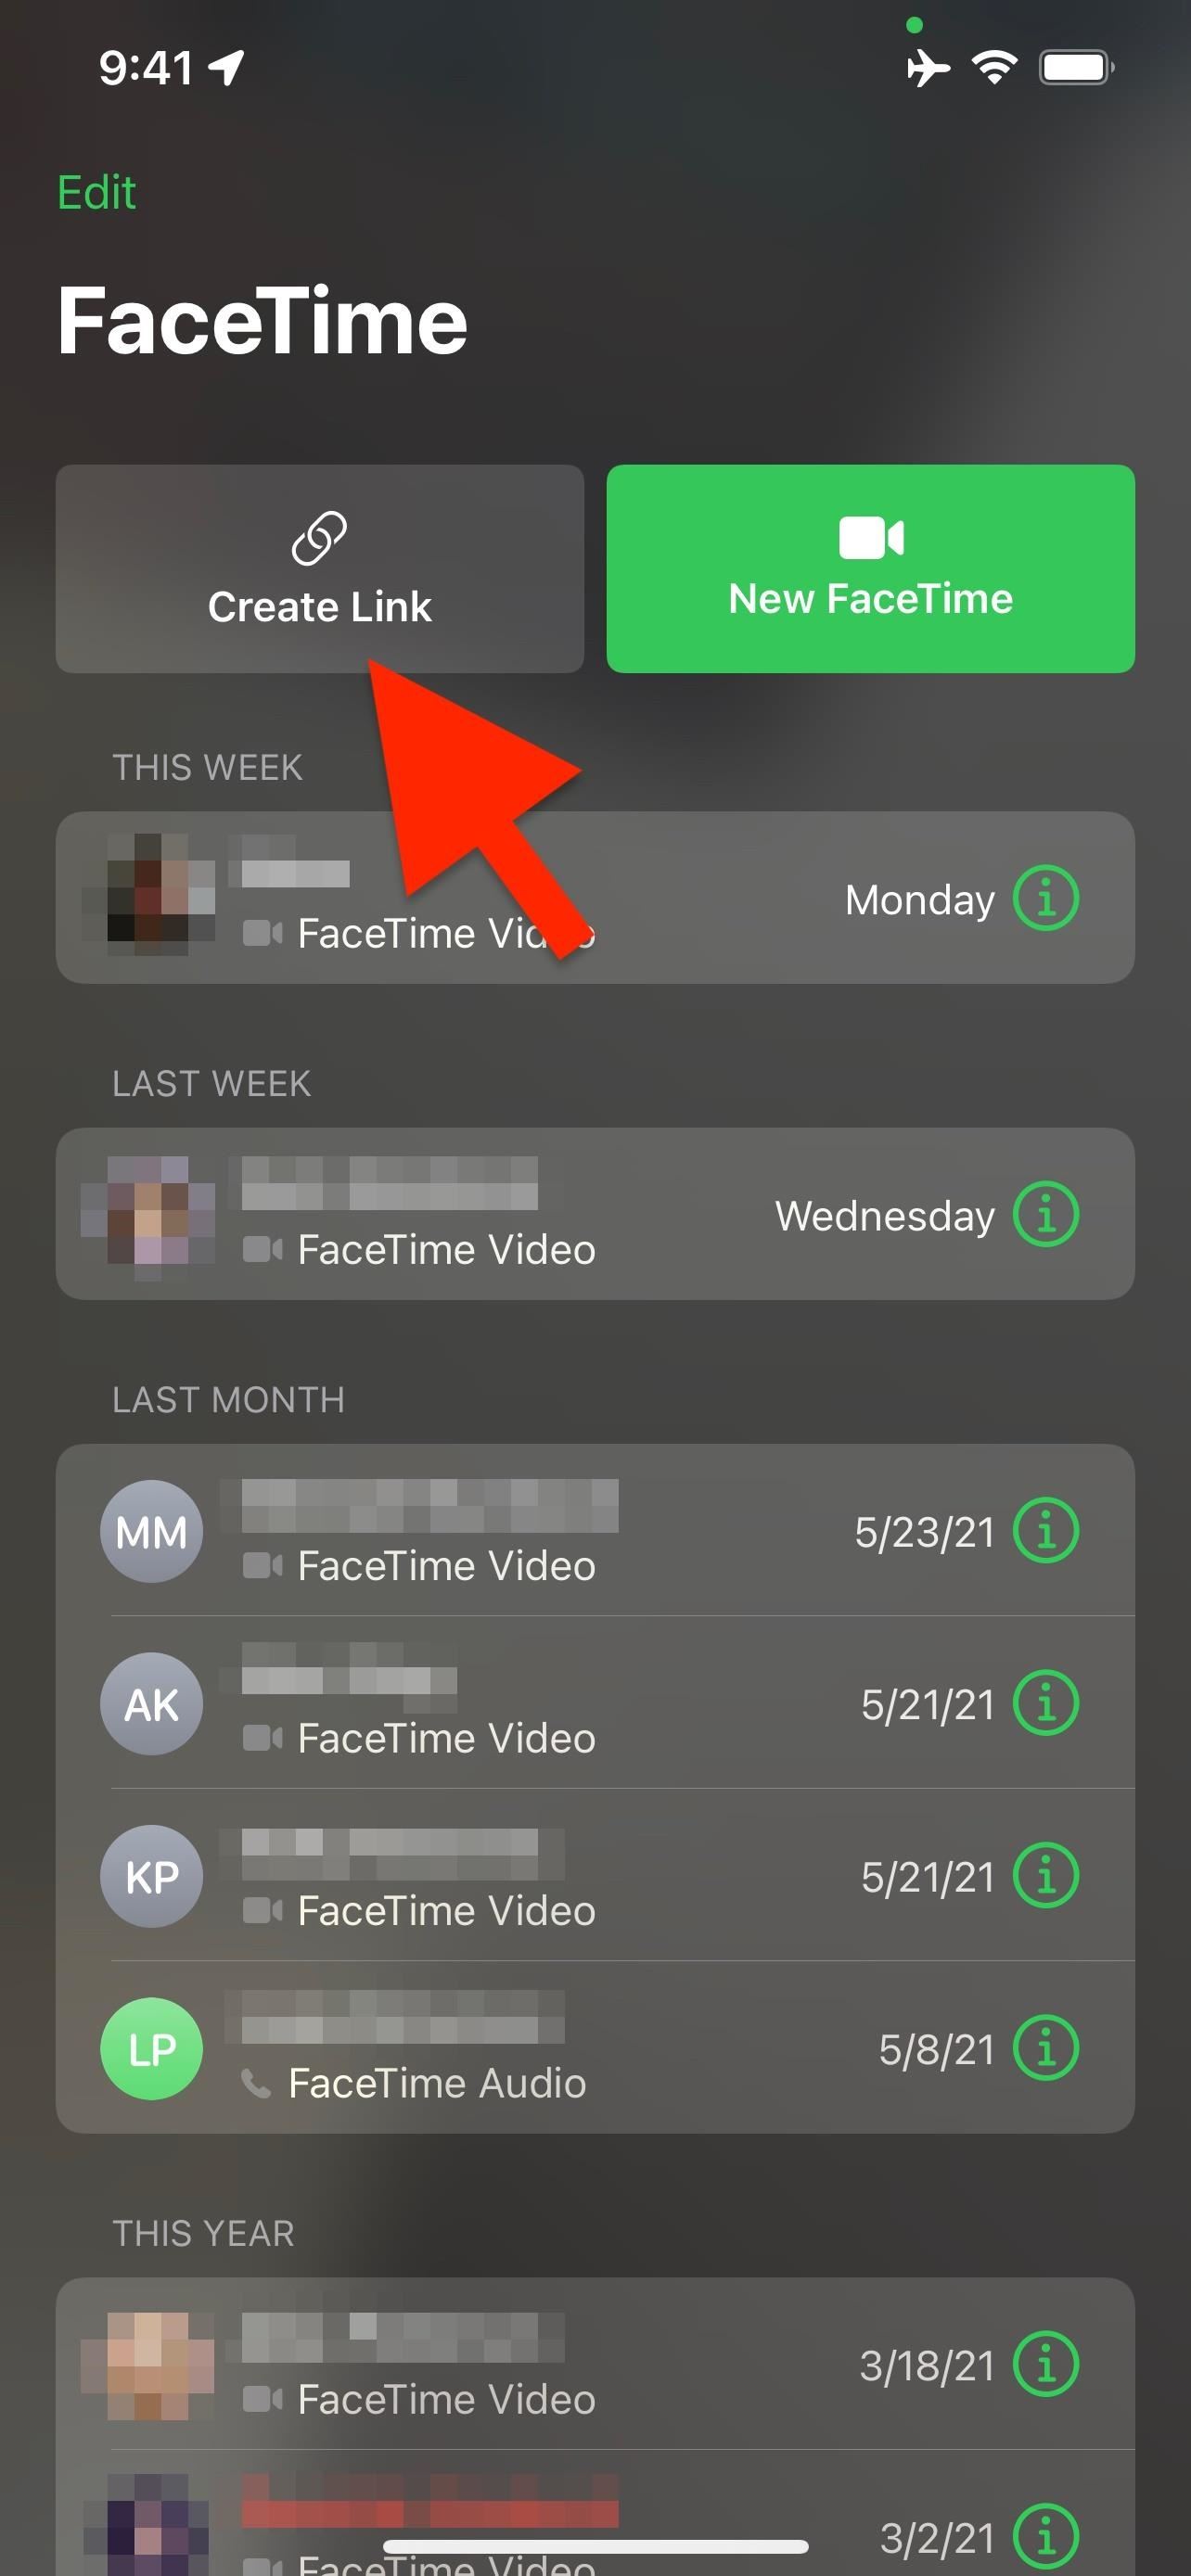 How to Add Android, Linux & Windows Users to FaceTime Calls in iOS 15